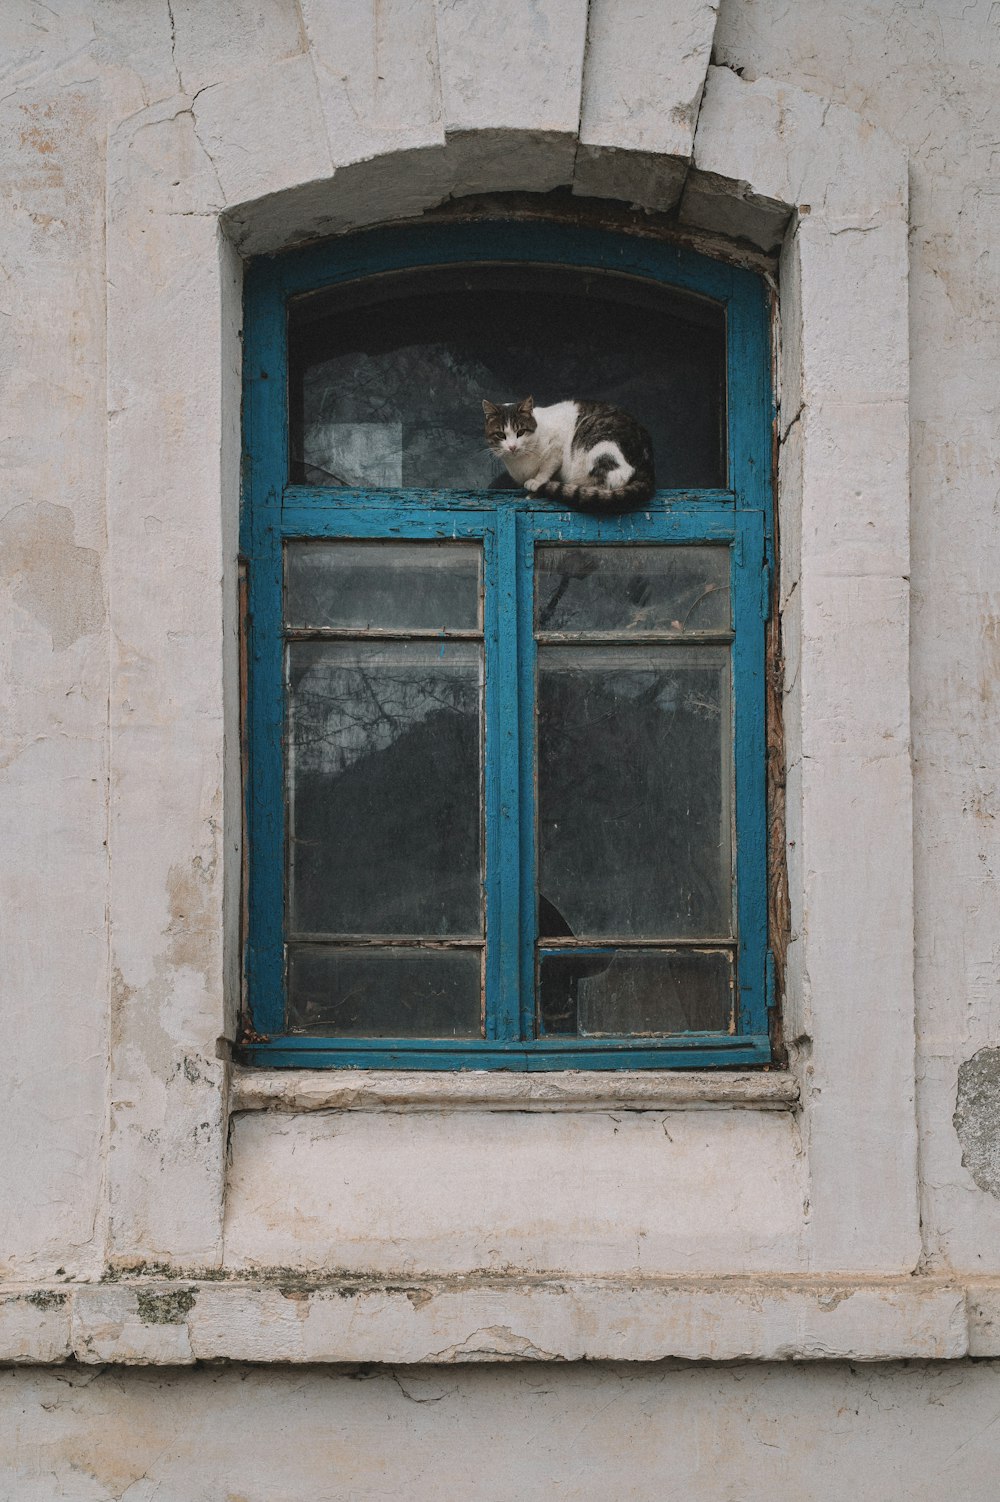 a black and white cat sitting on a window sill